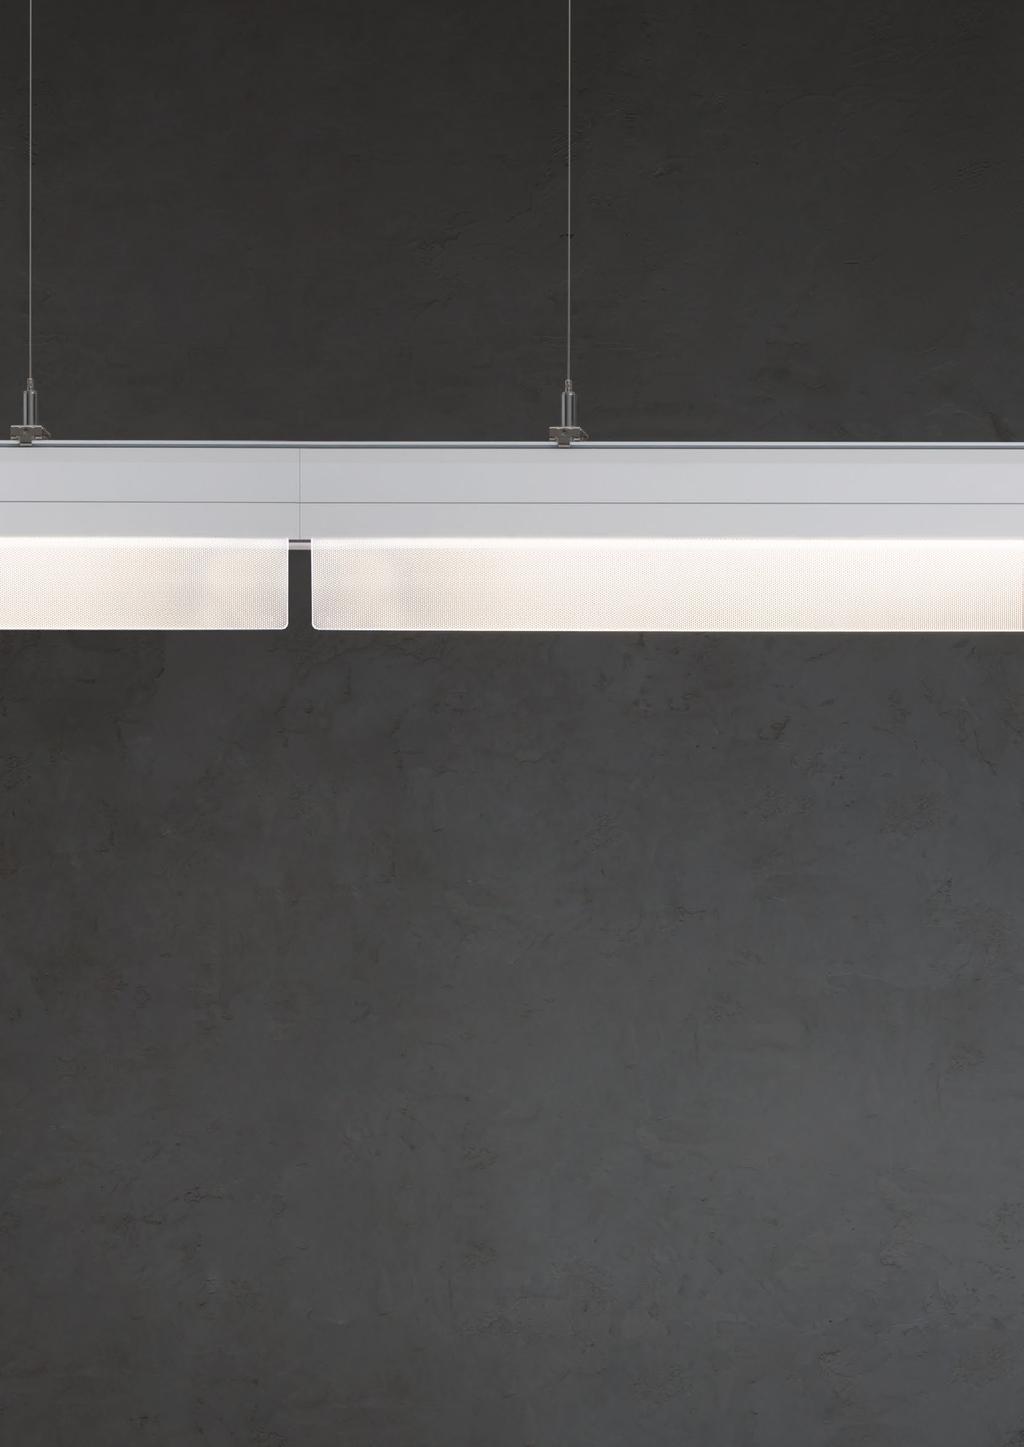 Versatile and efficient Trail: Linear LED Trunking System Trail is an innovative LED system in continuous rows, providing an optimal solution when lighting large merchandising areas: configurable